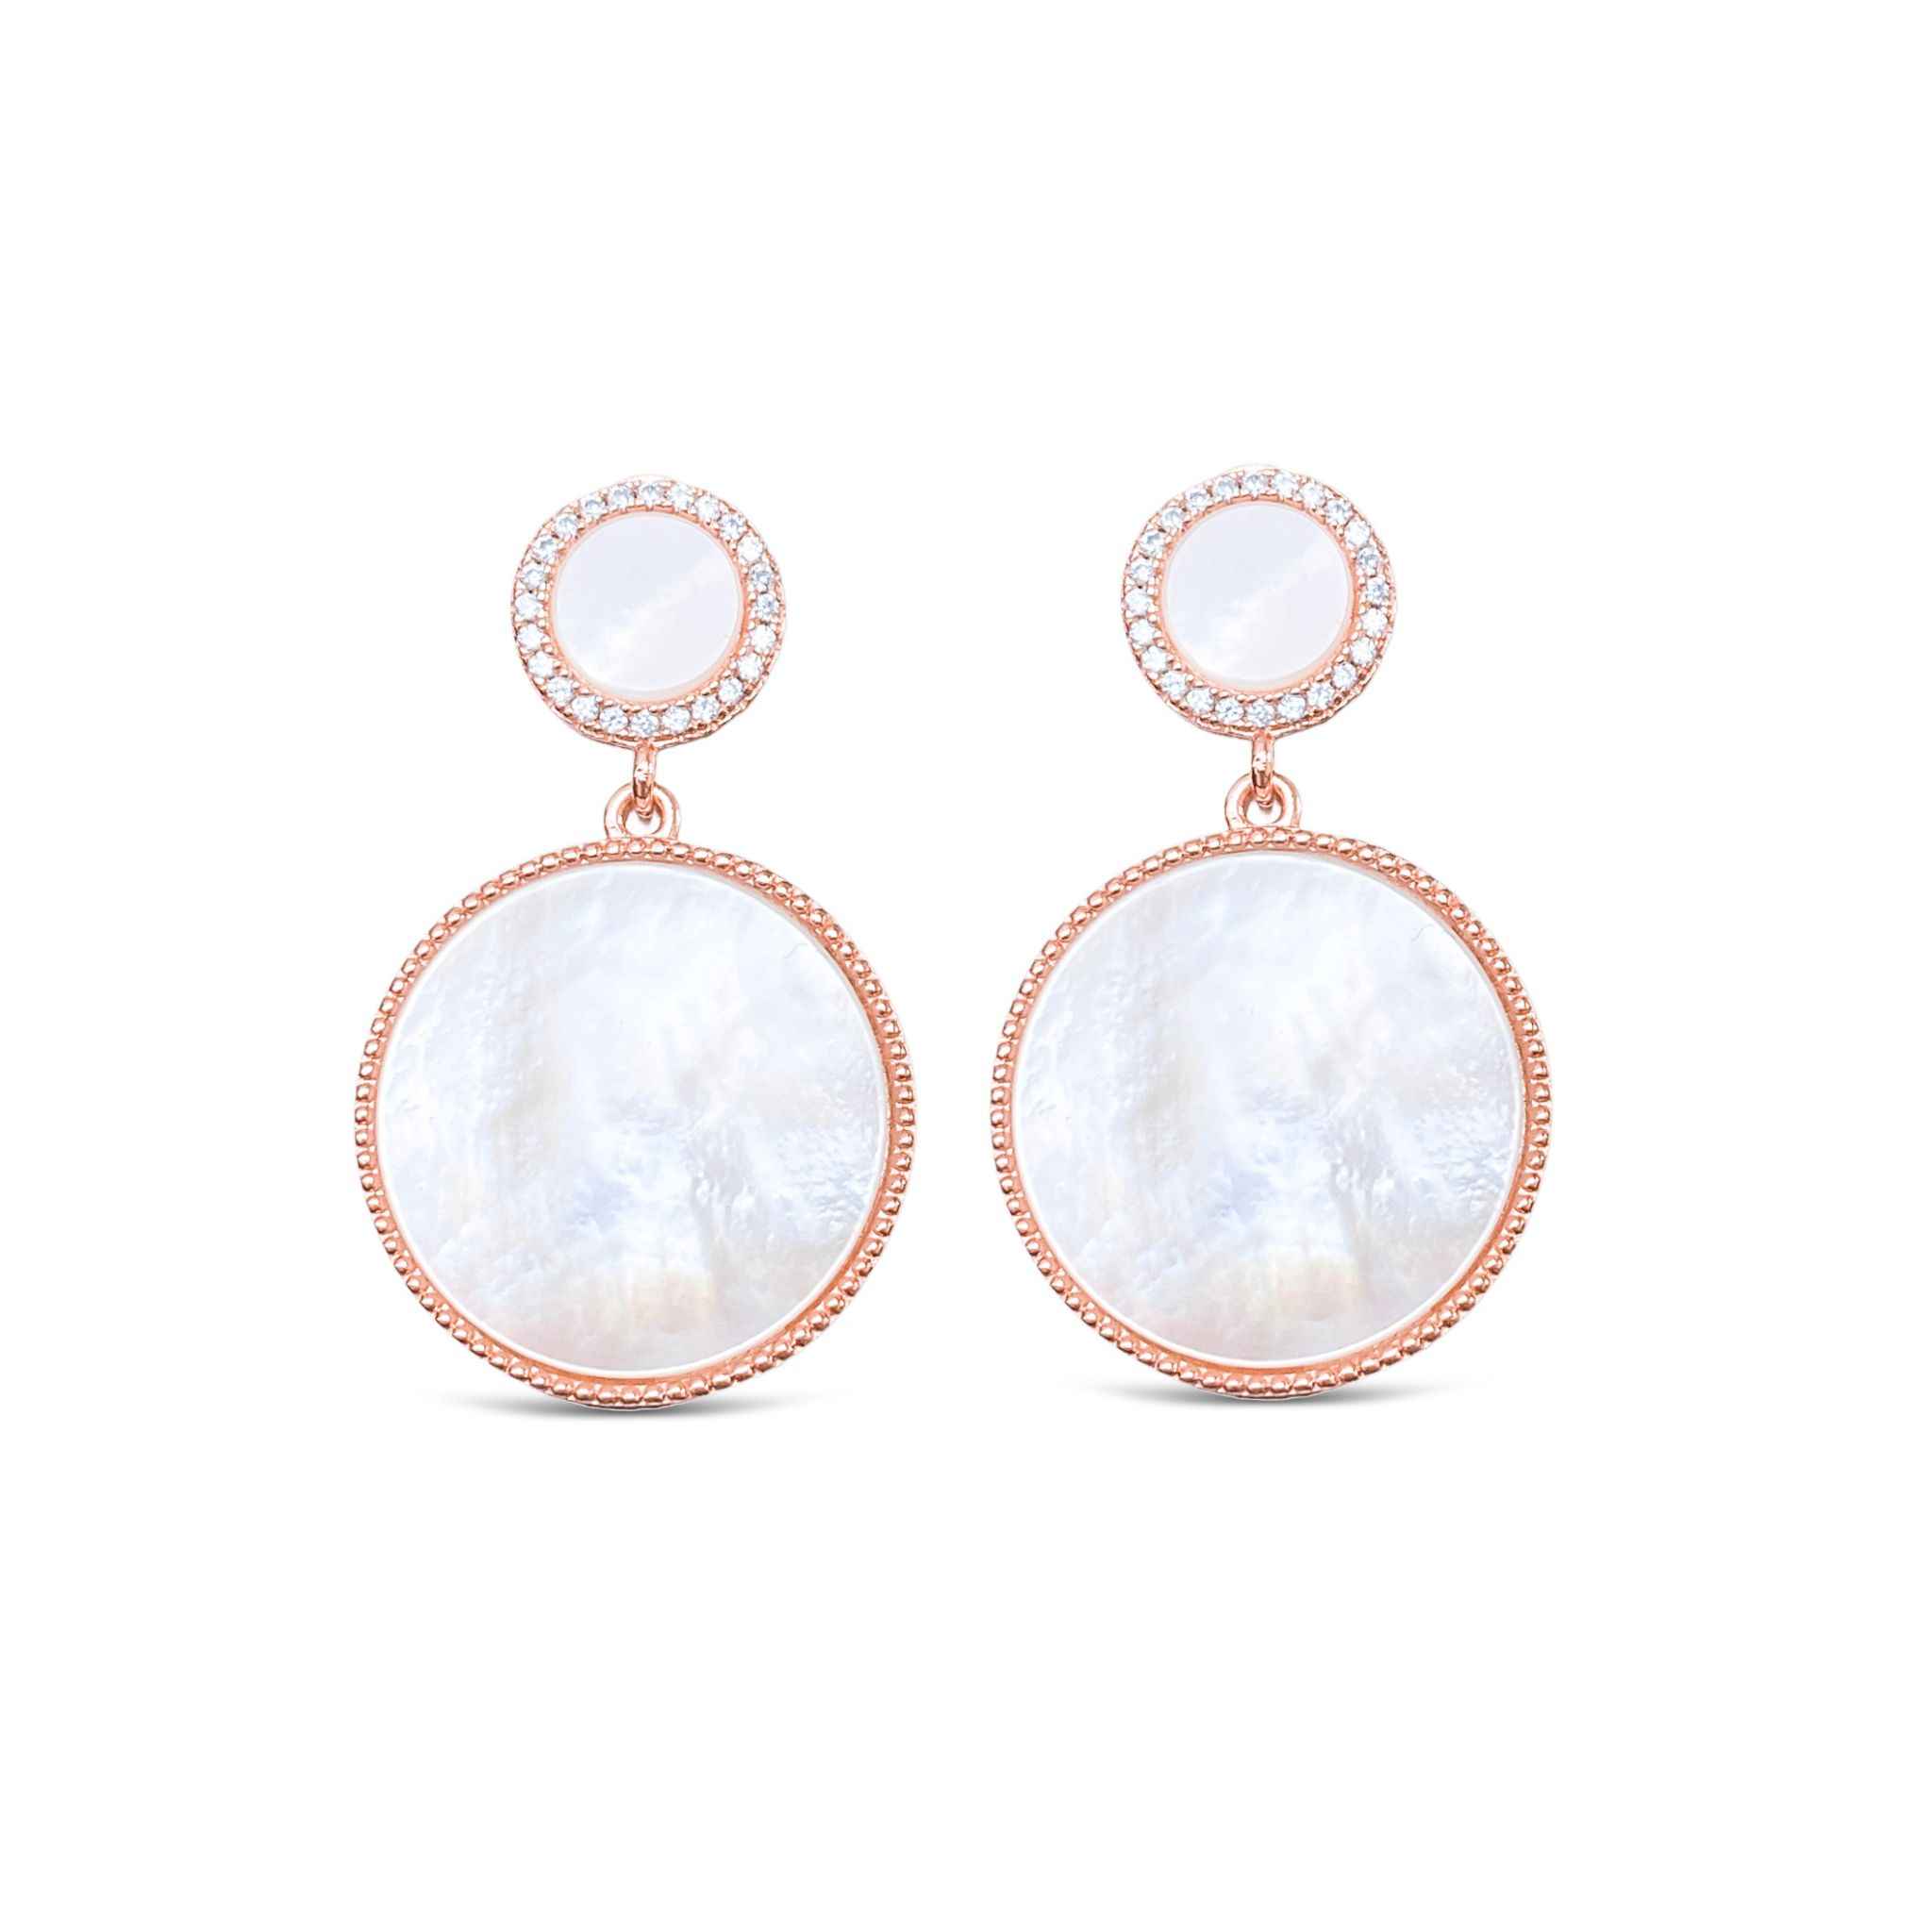 Elegant rose gold Mother of Pearl drop earrings with scalloped edging and cubic zirconia accents by Alessandra James.